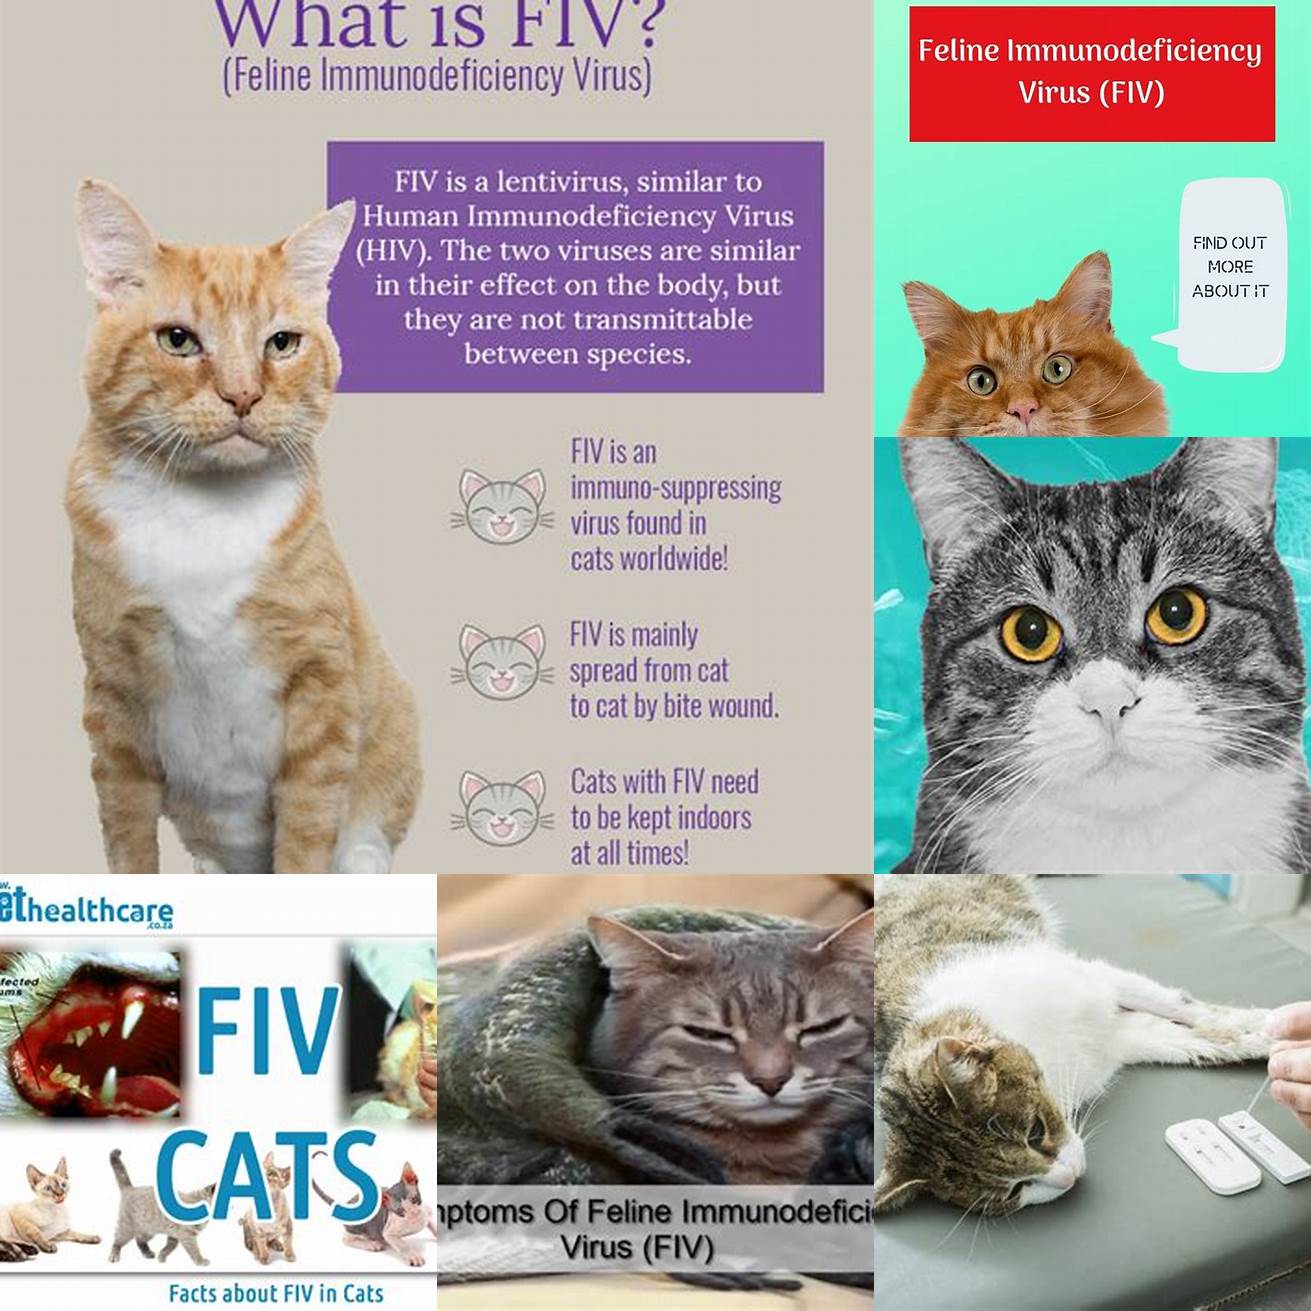 FIV is a viral disease that affects cats and weakens their immune system Its spread through bites from infected cats